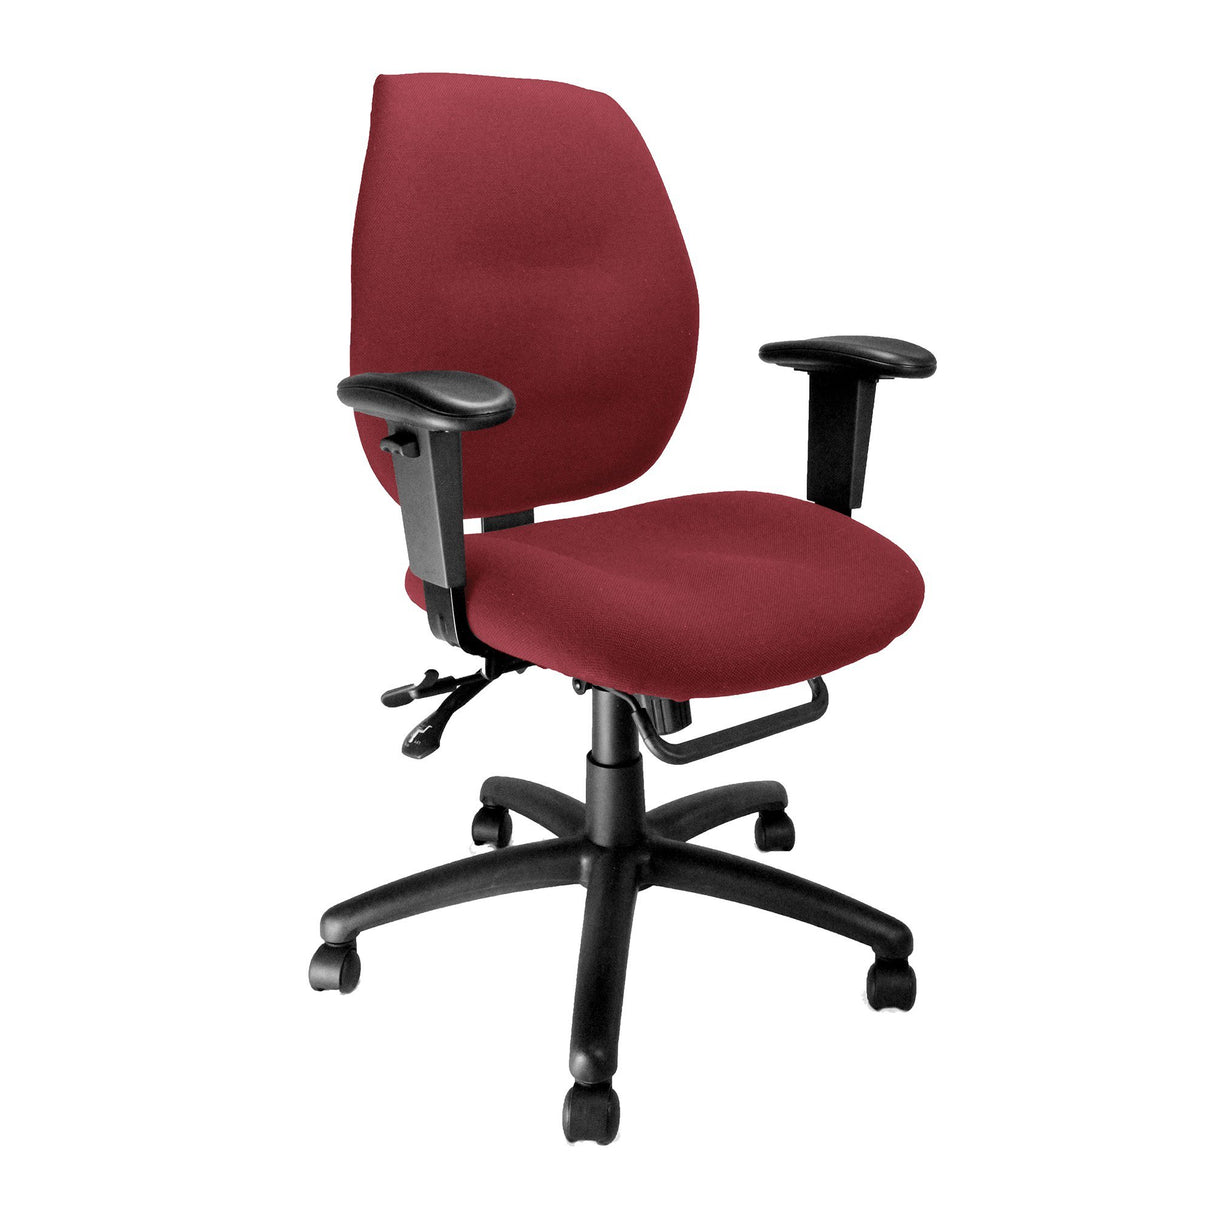 Nautilus Designs Severn Ergonomic Medium Back Multi-Functional Synchronous Operator Chair with Adjustable Arms - Wine